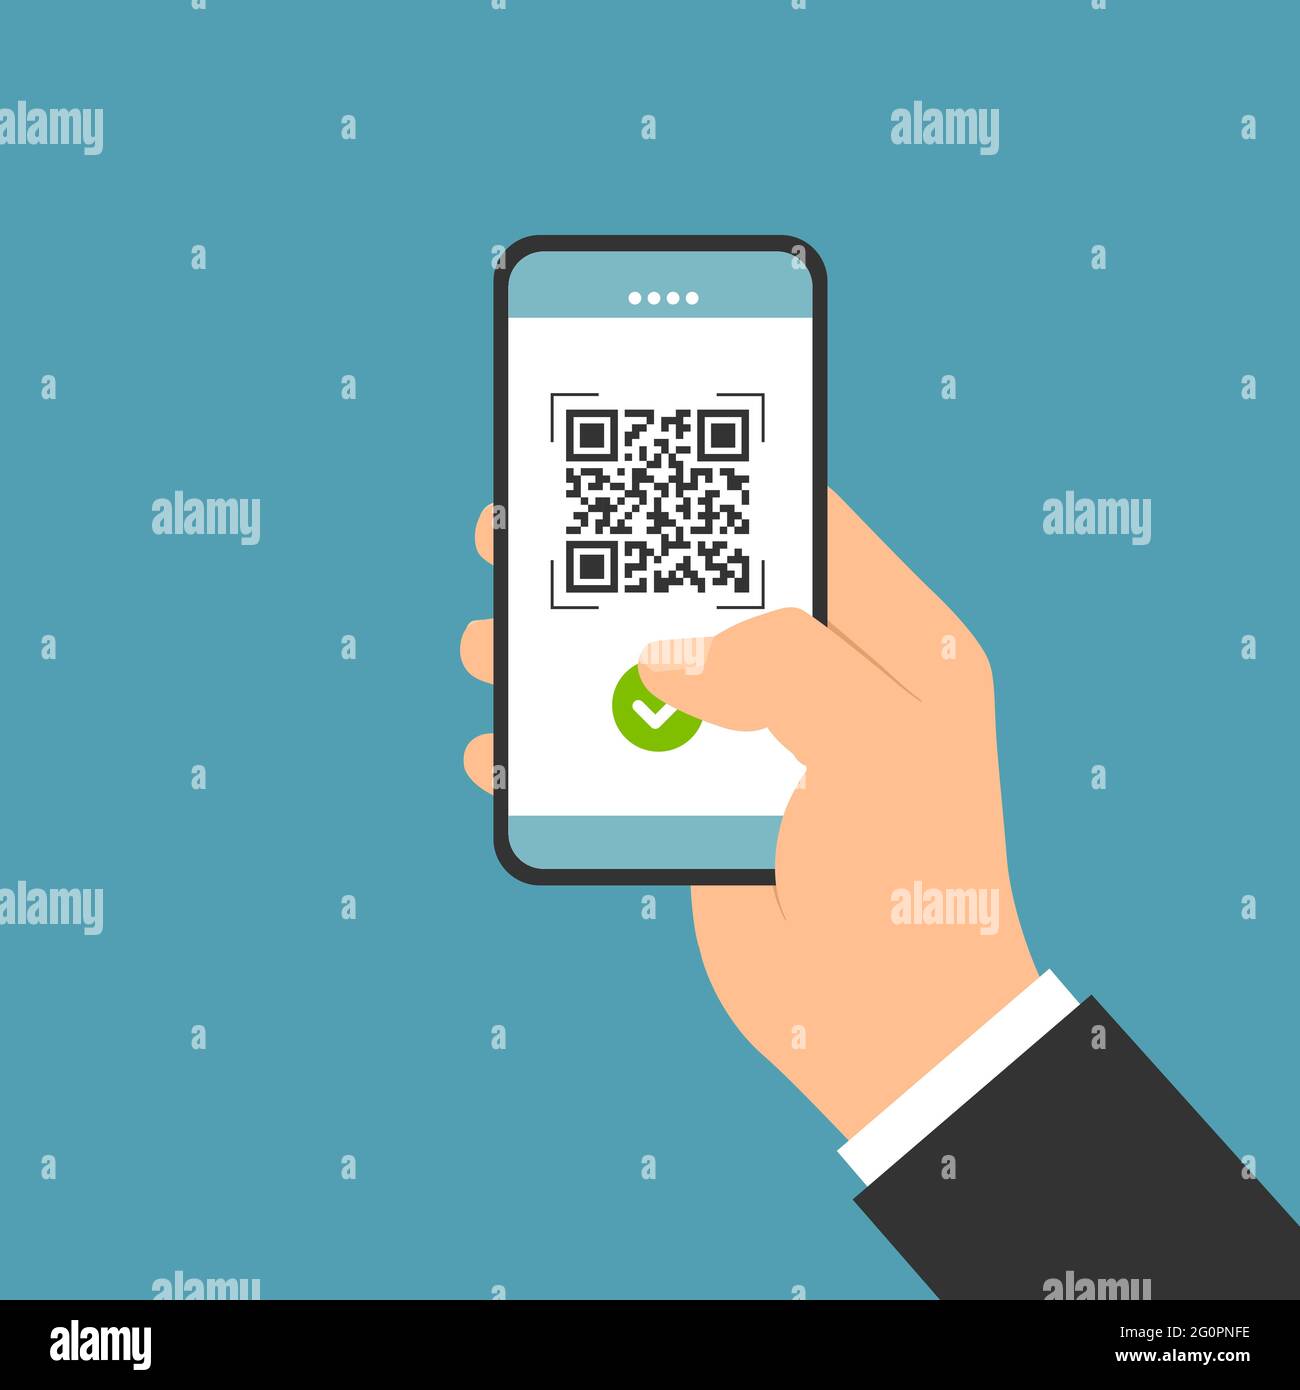 Flat design illustration of male hand holding touch screen mobile phone. QR code scan for payment - business vector Stock Vector